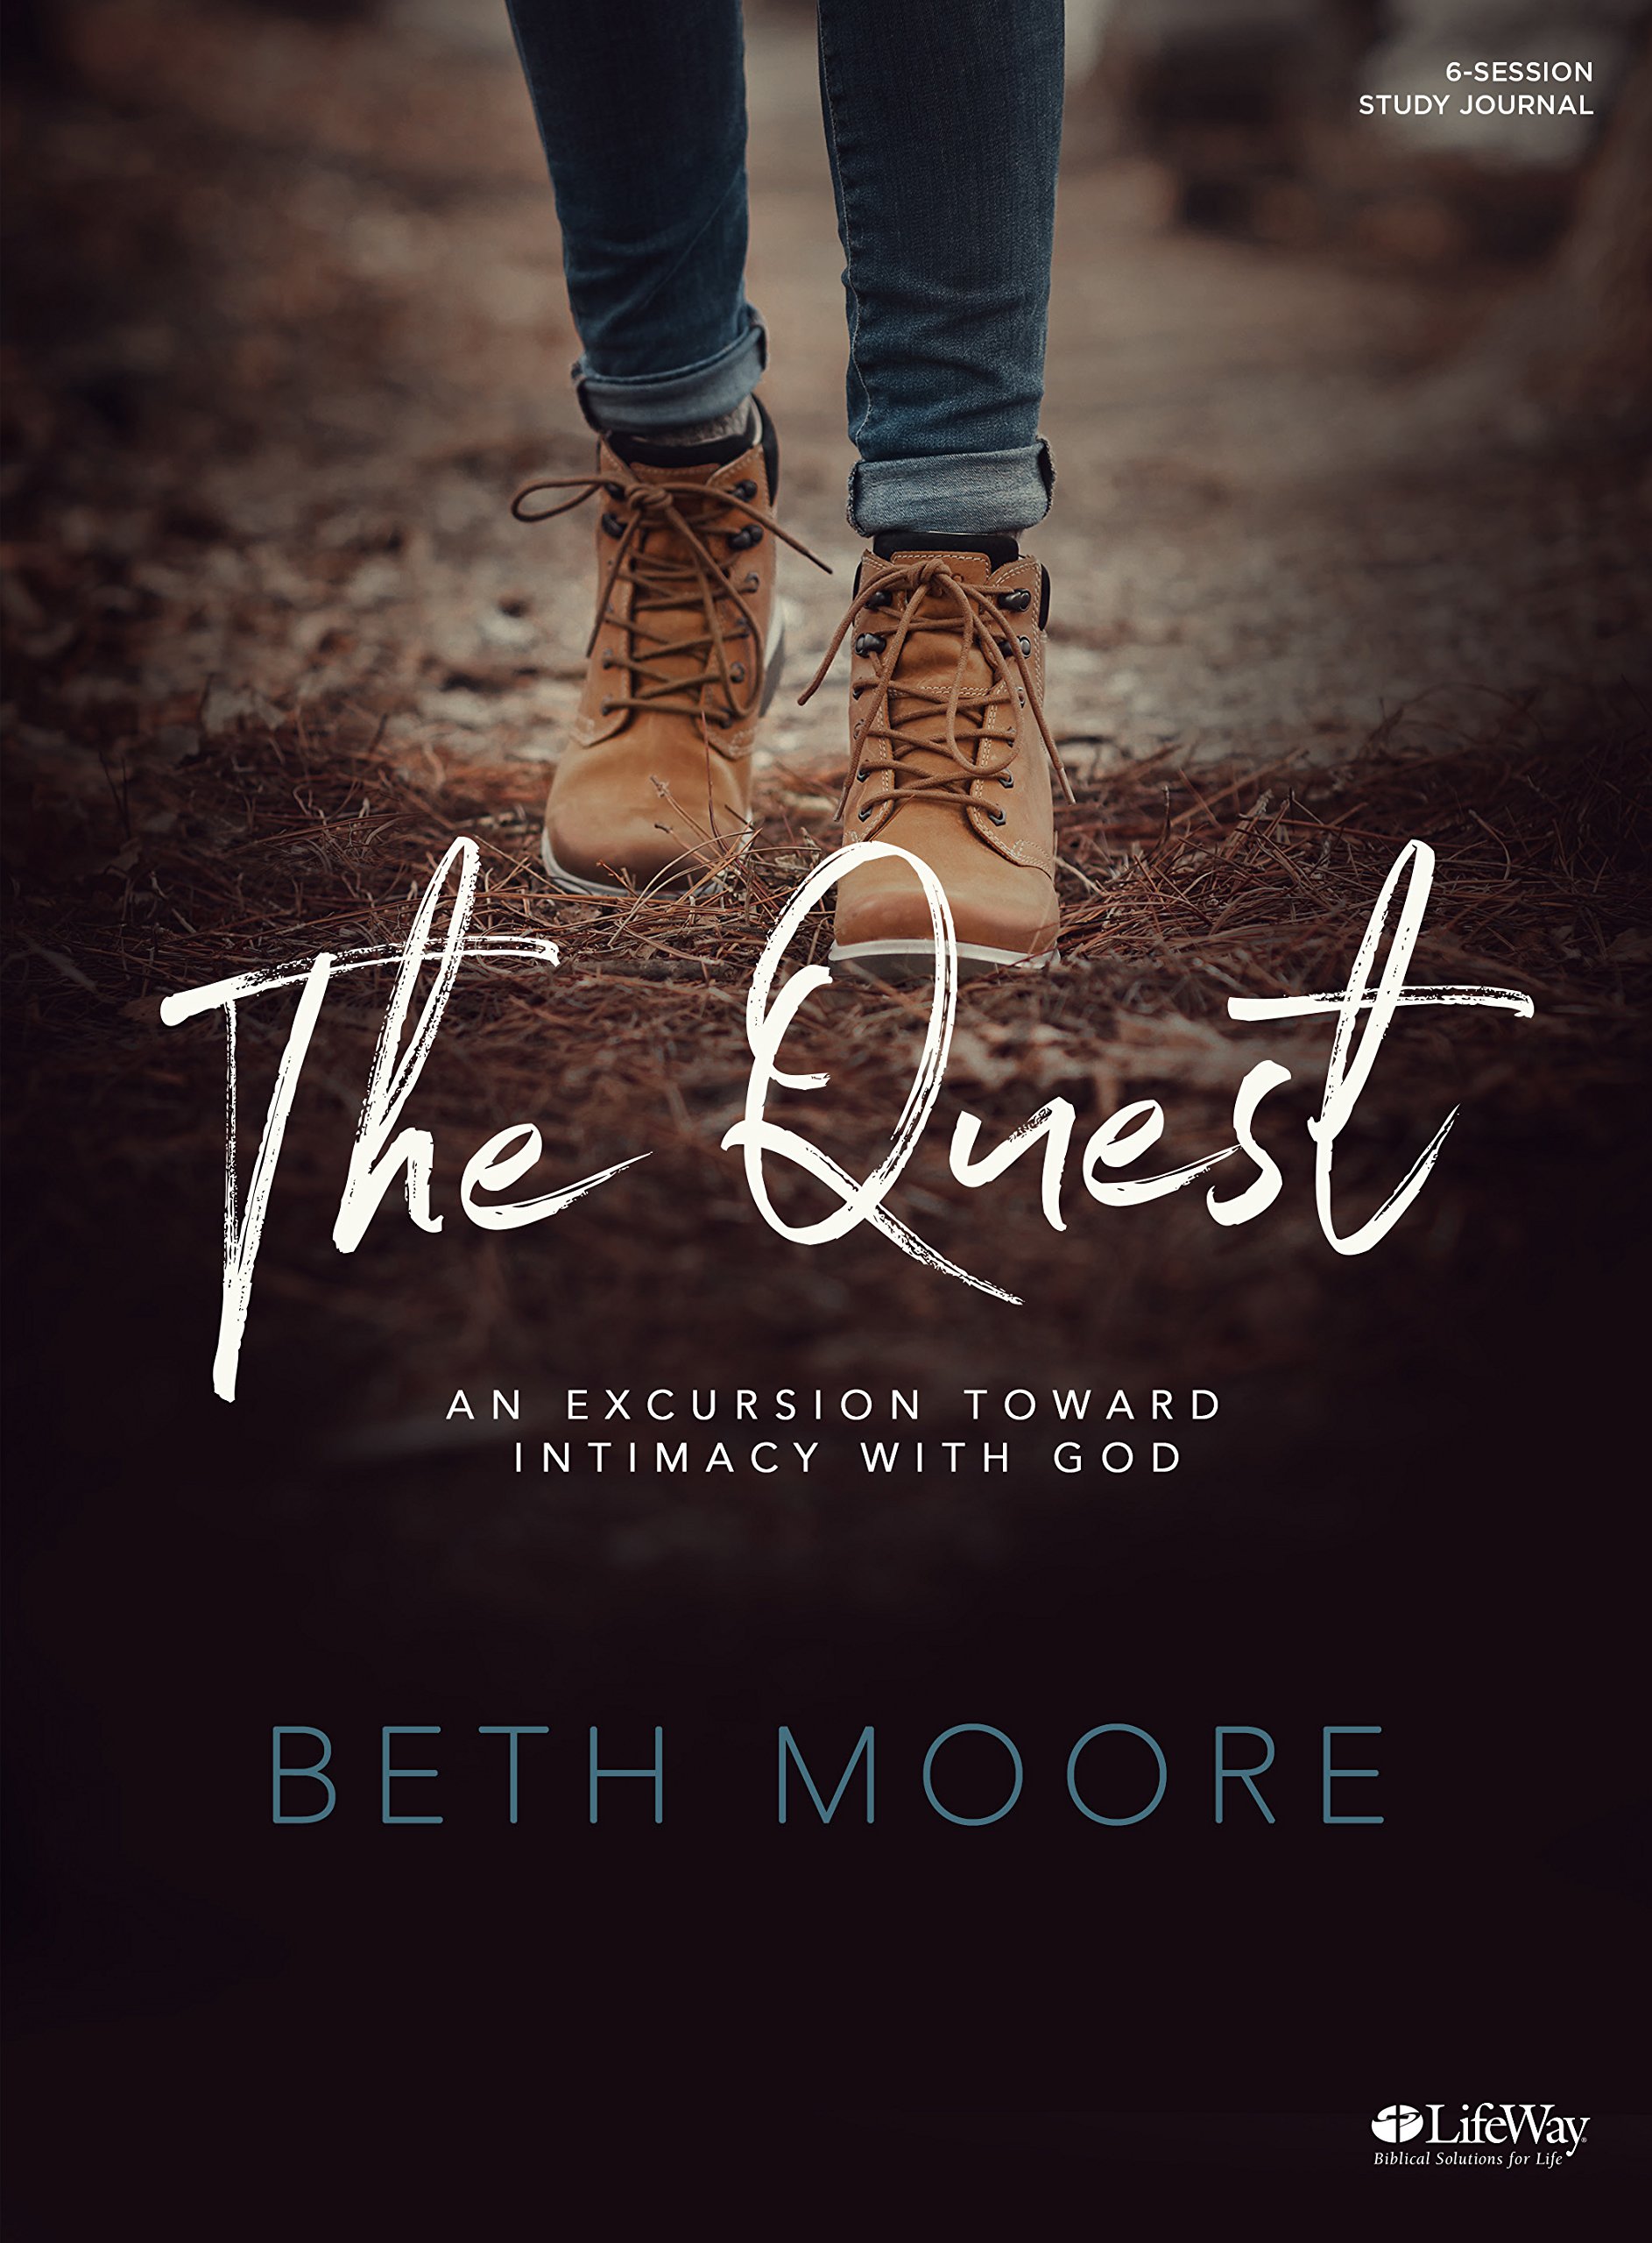 The Quest - Study Journal: An Excursion Toward Intimacy with God